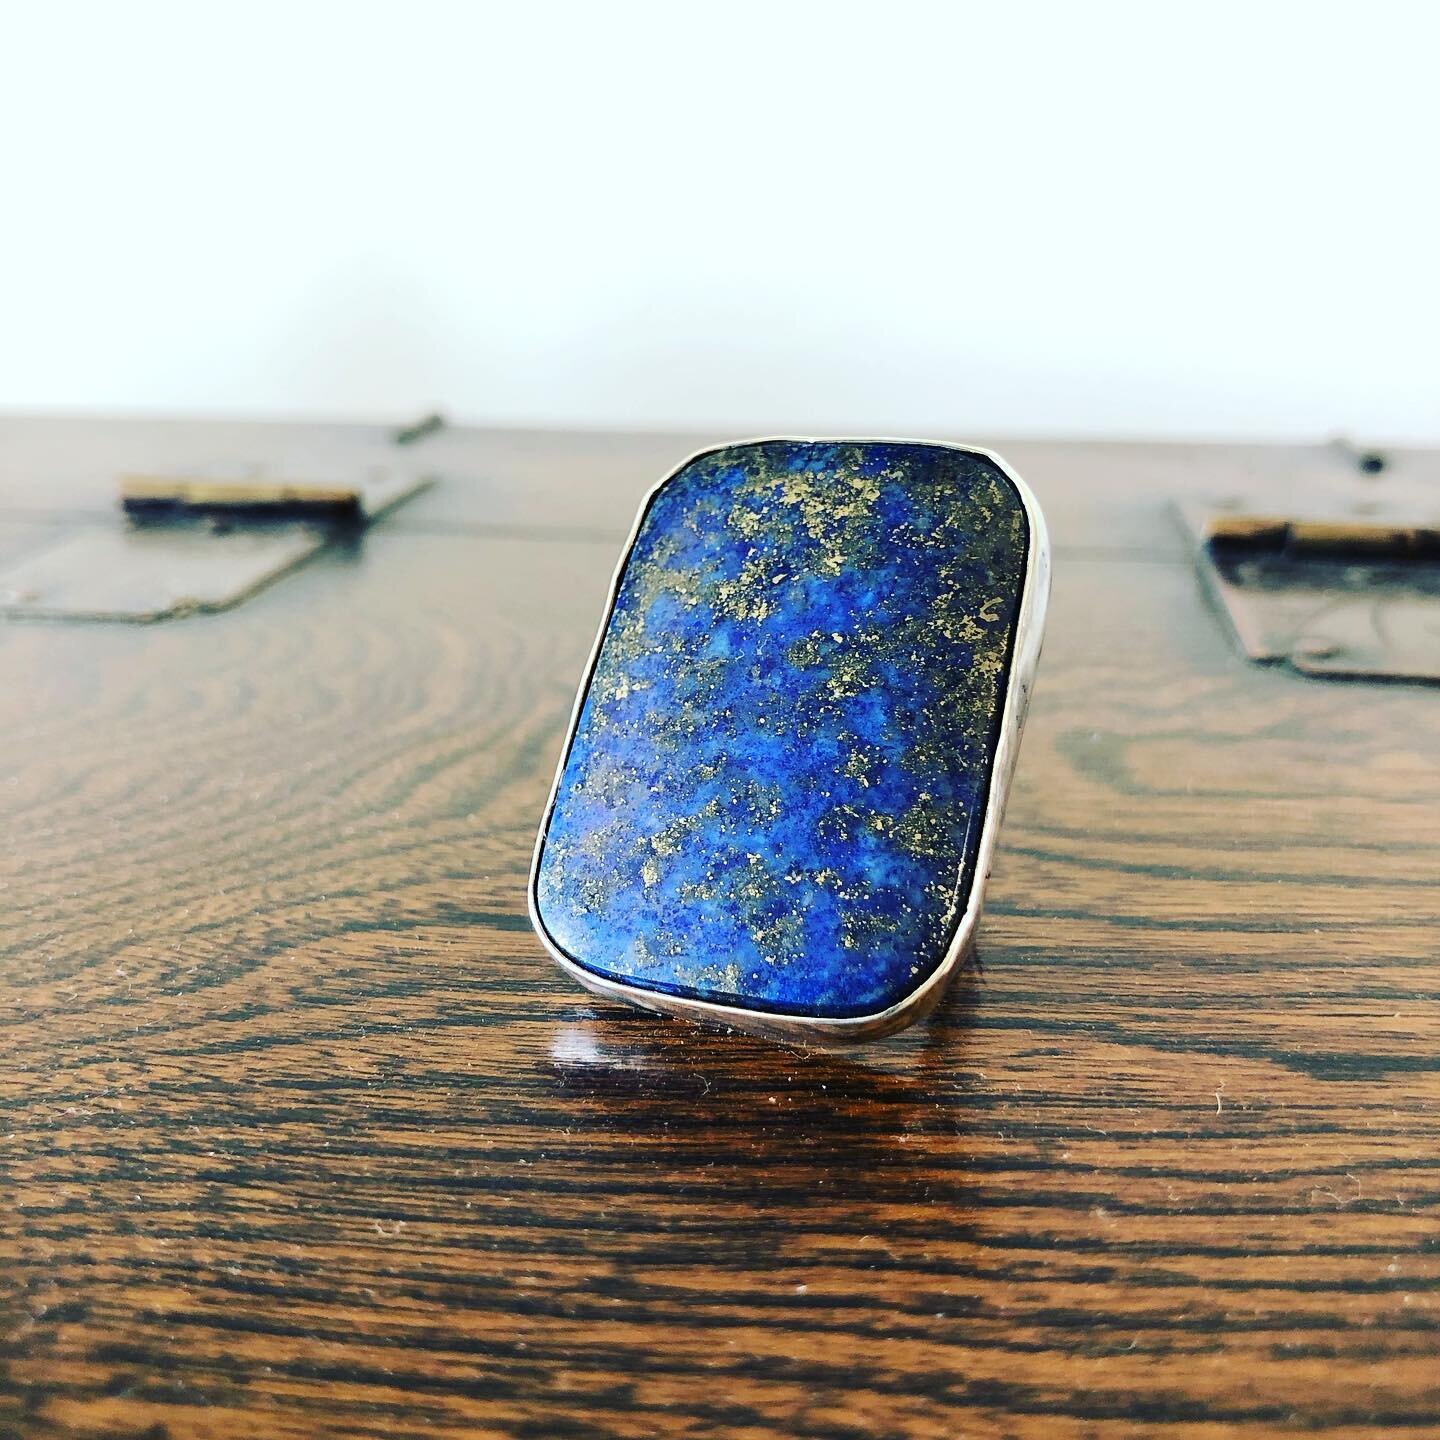 Made a massive lapis lazuli ring for Mrs B&rsquo;s birthday tomorrow. Gave it to her a day early. Slightly too small. I broke the stone in two trying to tap the ring up a size. I&rsquo;ll have to try Kintsugi-ing it. Dang.